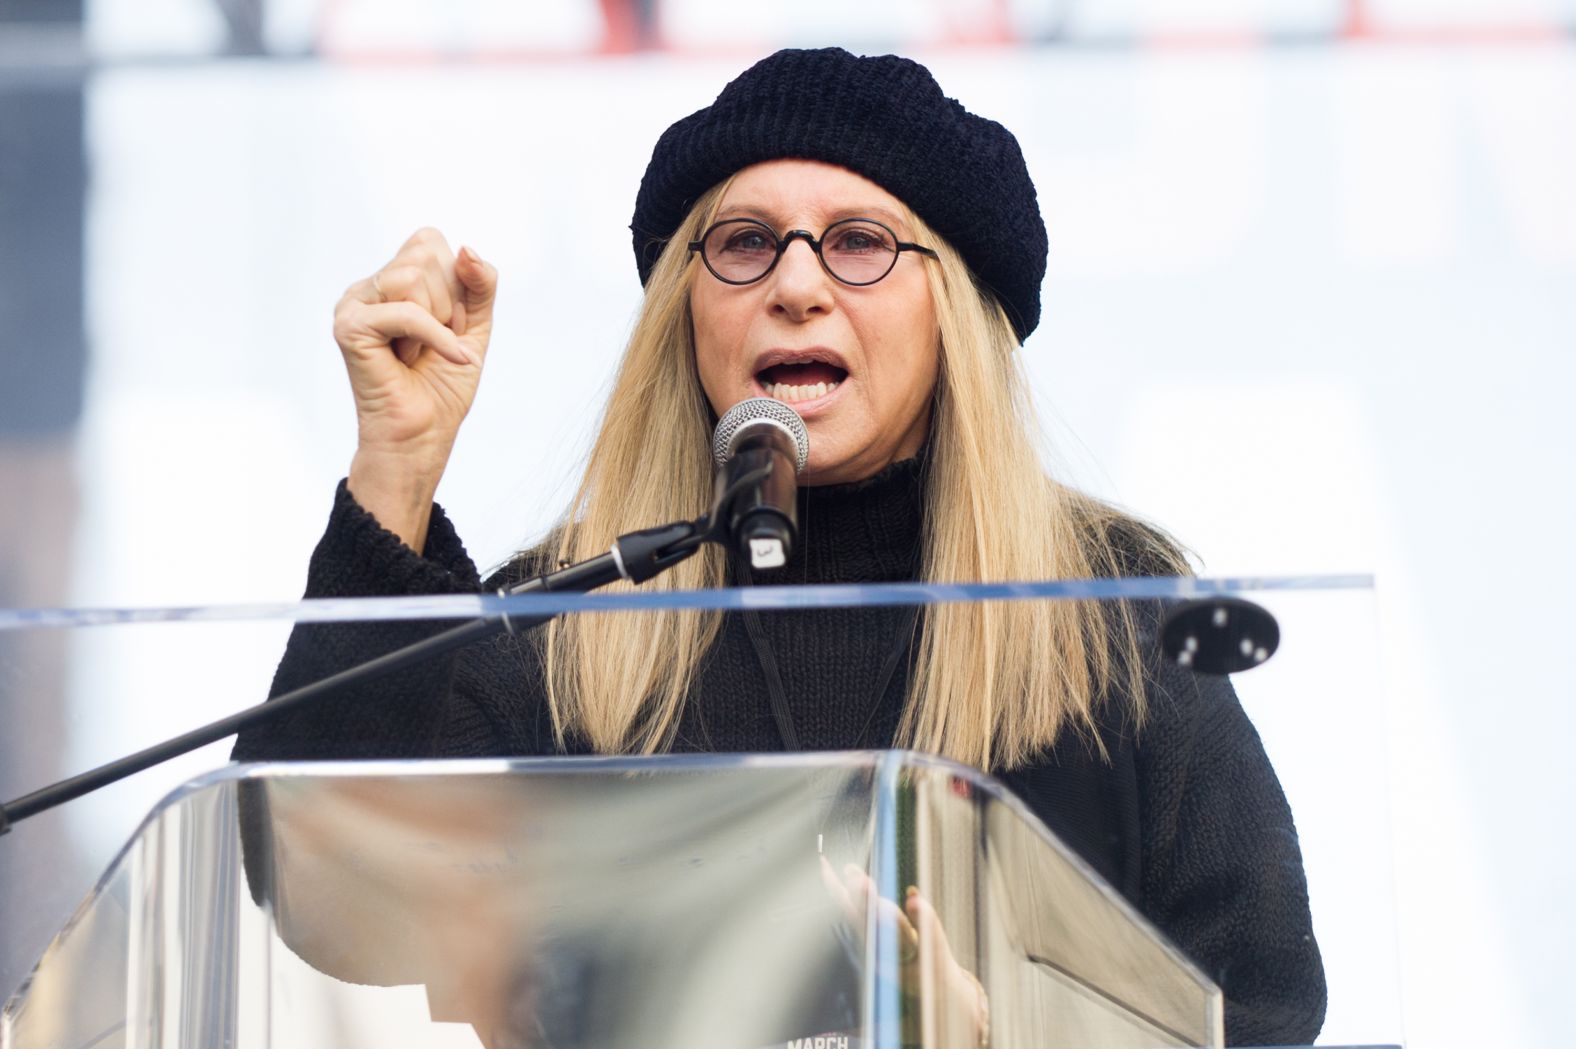 Streisand speaks at the 2017 women's march in Los Angeles.